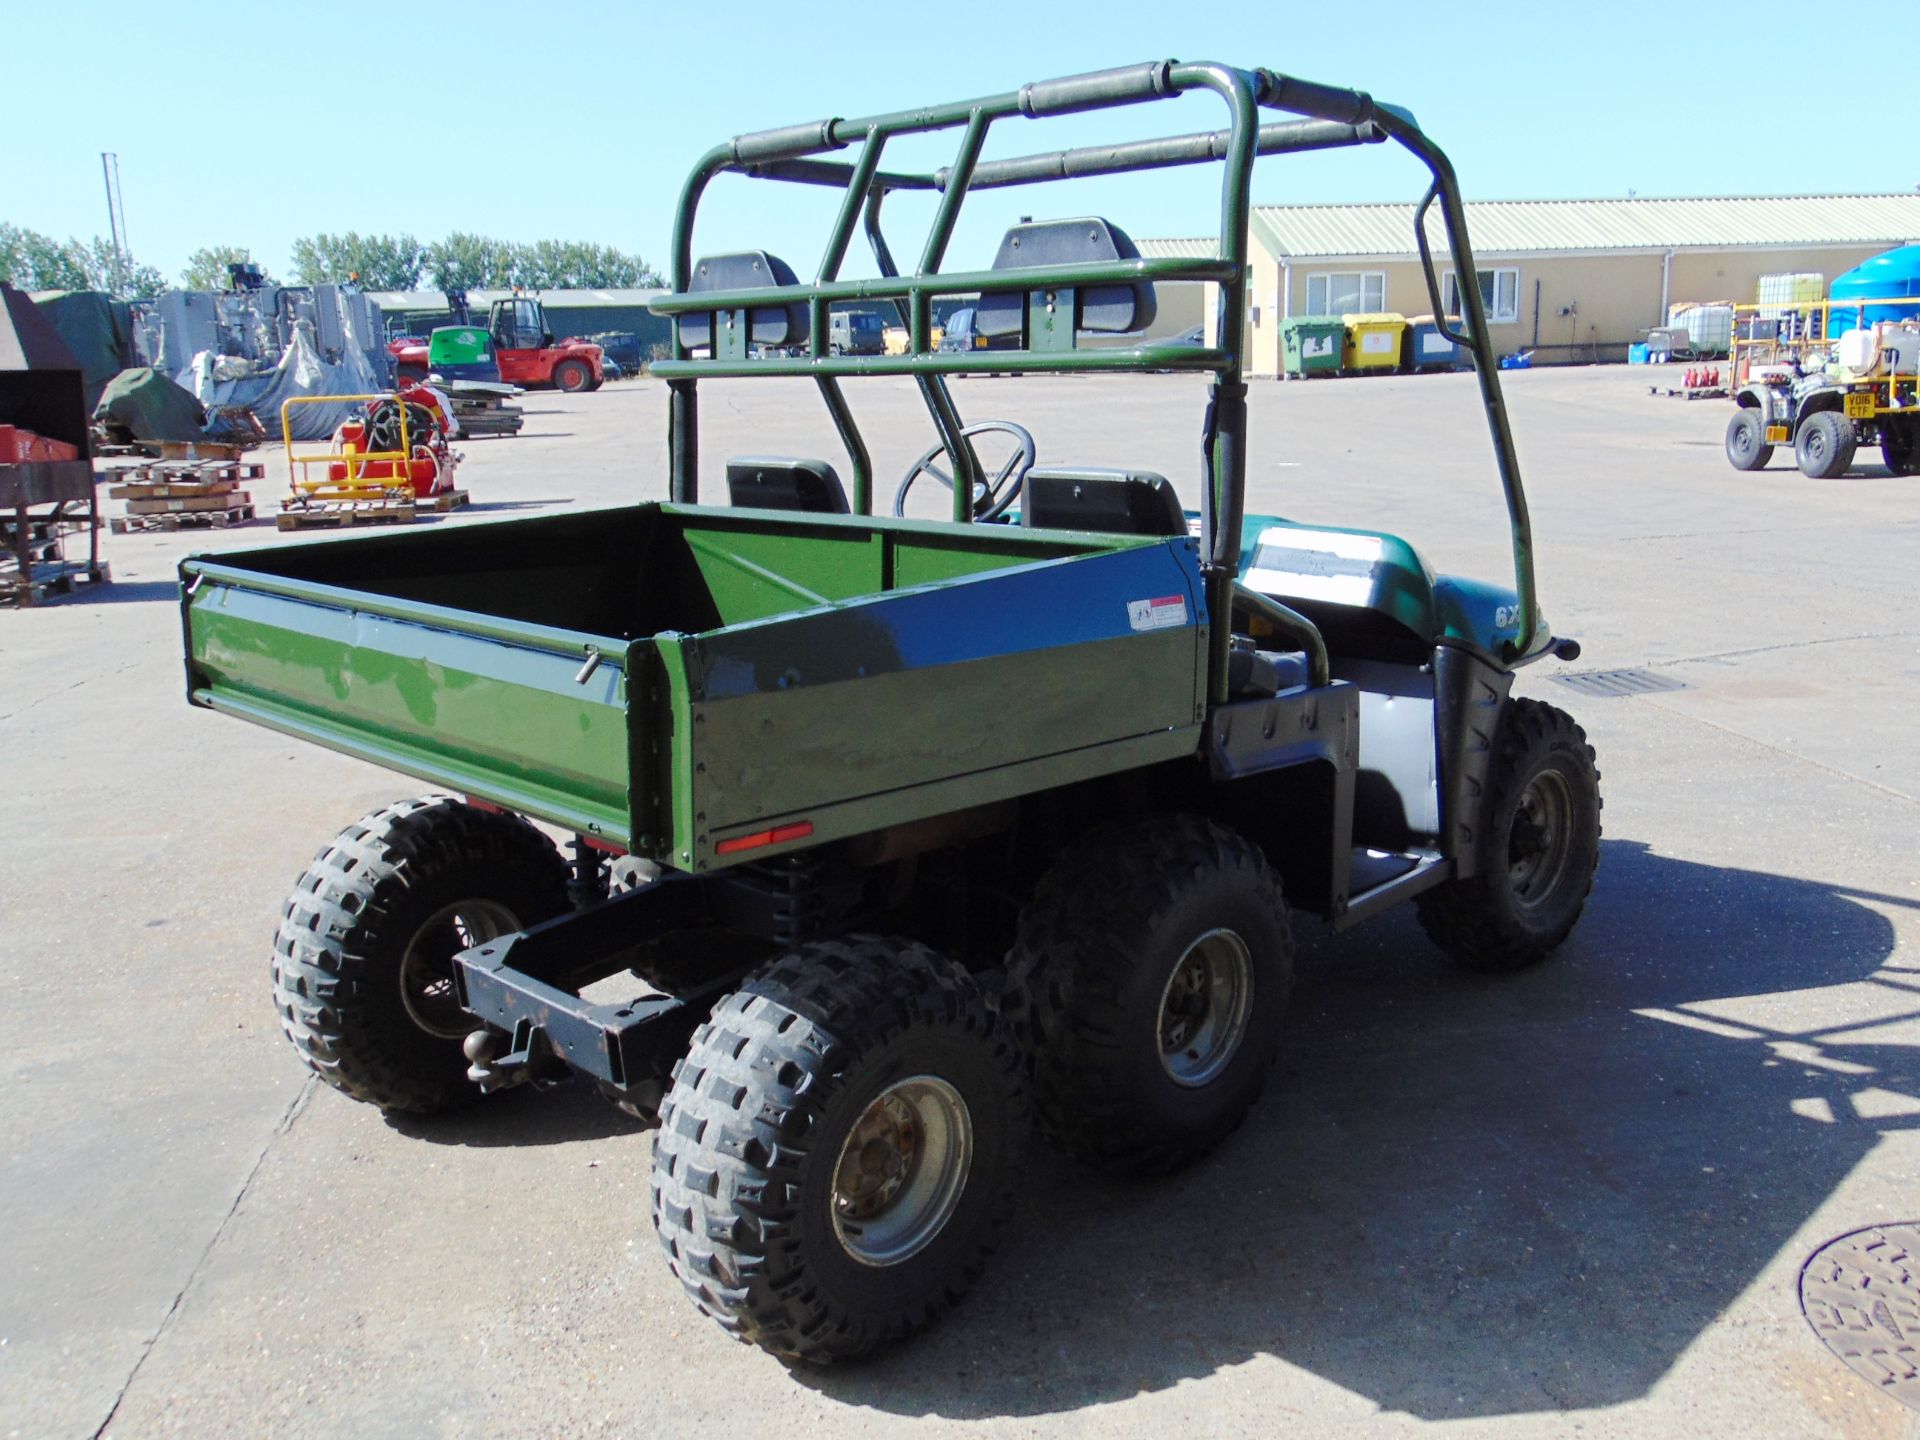 Polaris 6x6 Ranger Utility Vehicle Only 226 Hours! From National Grid. - Image 9 of 27